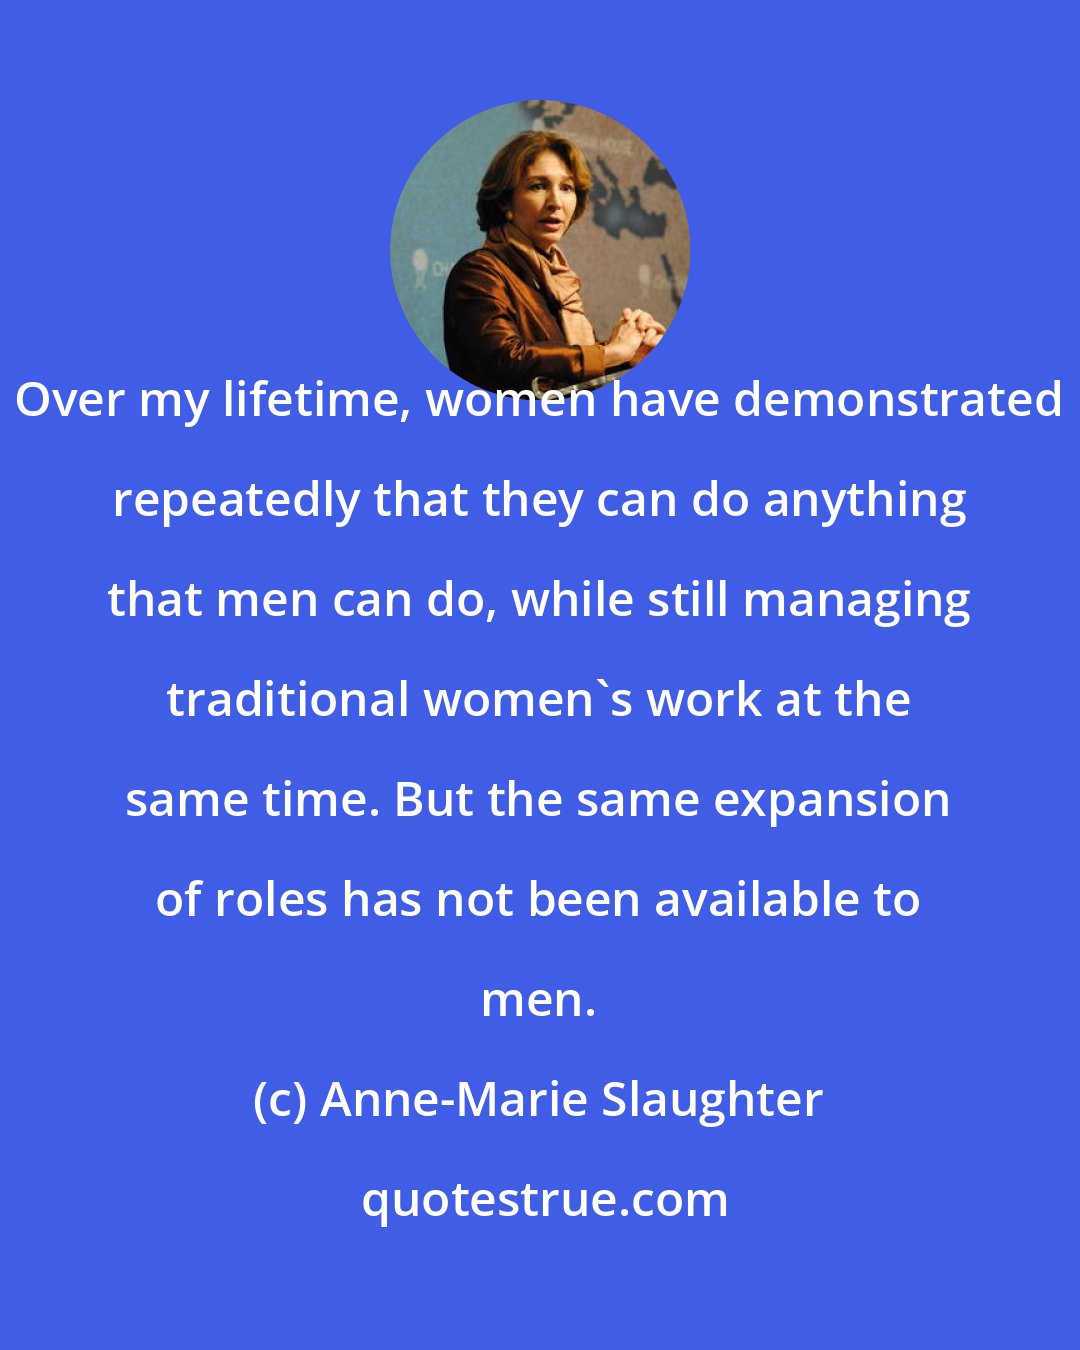 Anne-Marie Slaughter: Over my lifetime, women have demonstrated repeatedly that they can do anything that men can do, while still managing traditional women's work at the same time. But the same expansion of roles has not been available to men.